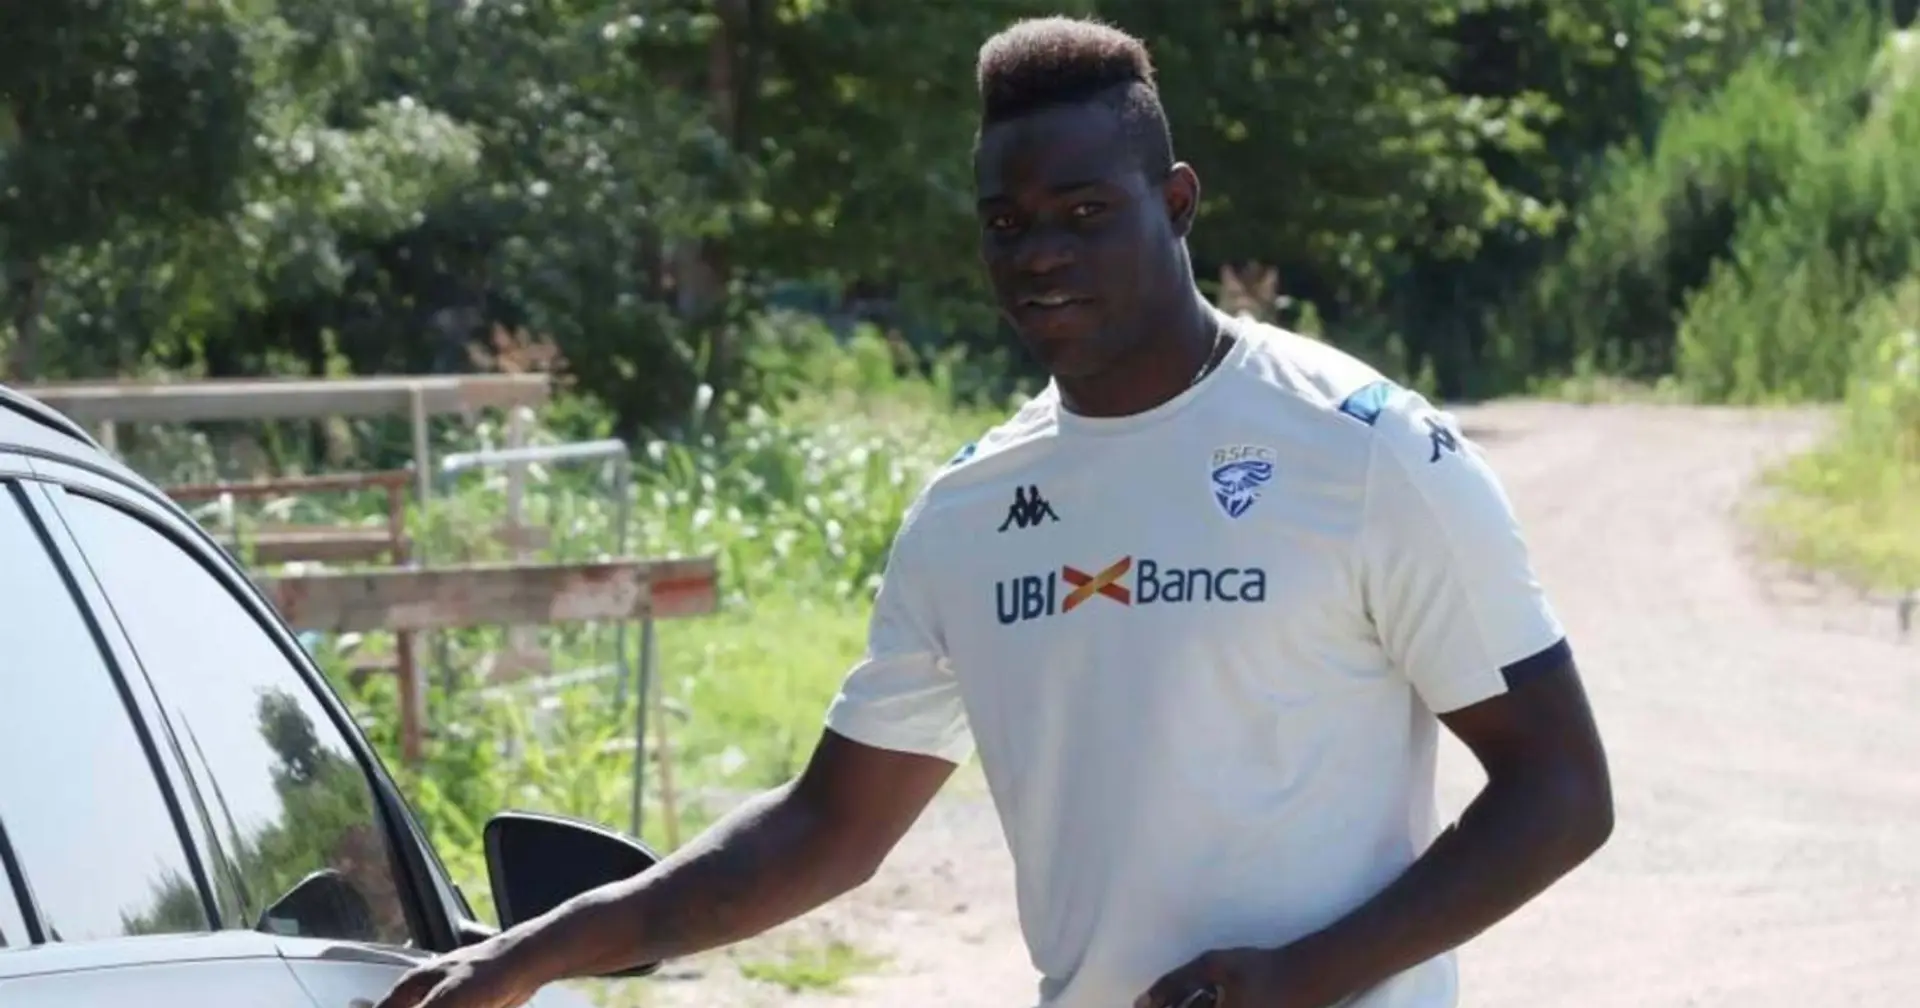 Mario Balotelli's bitter row with Brescia continues as club updates striker's weight up to 99.8kg